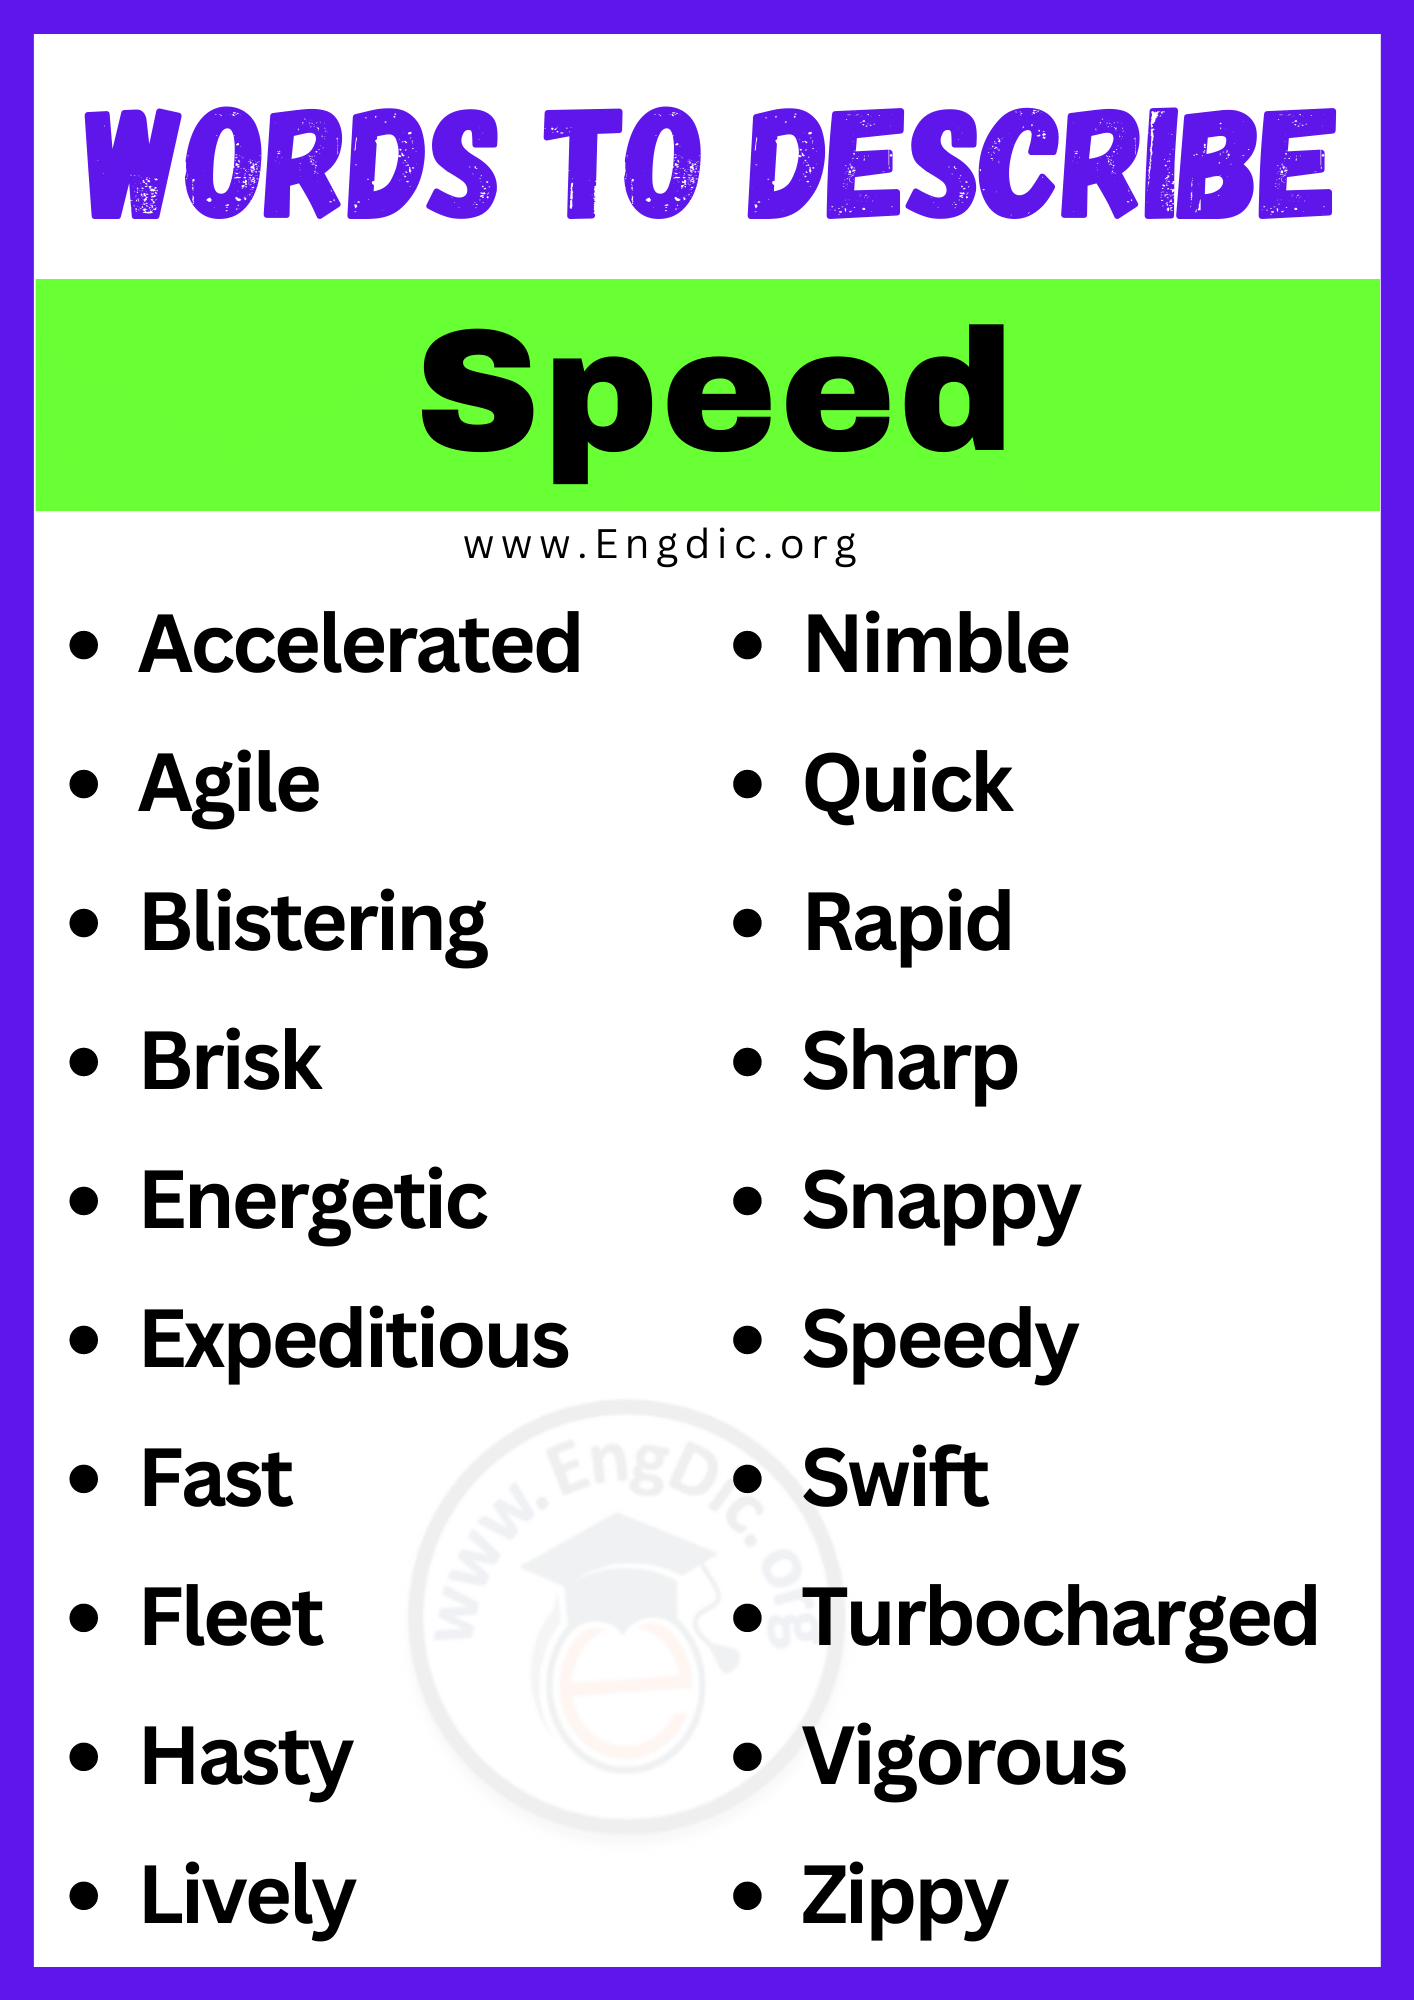 Words to Describe Speed